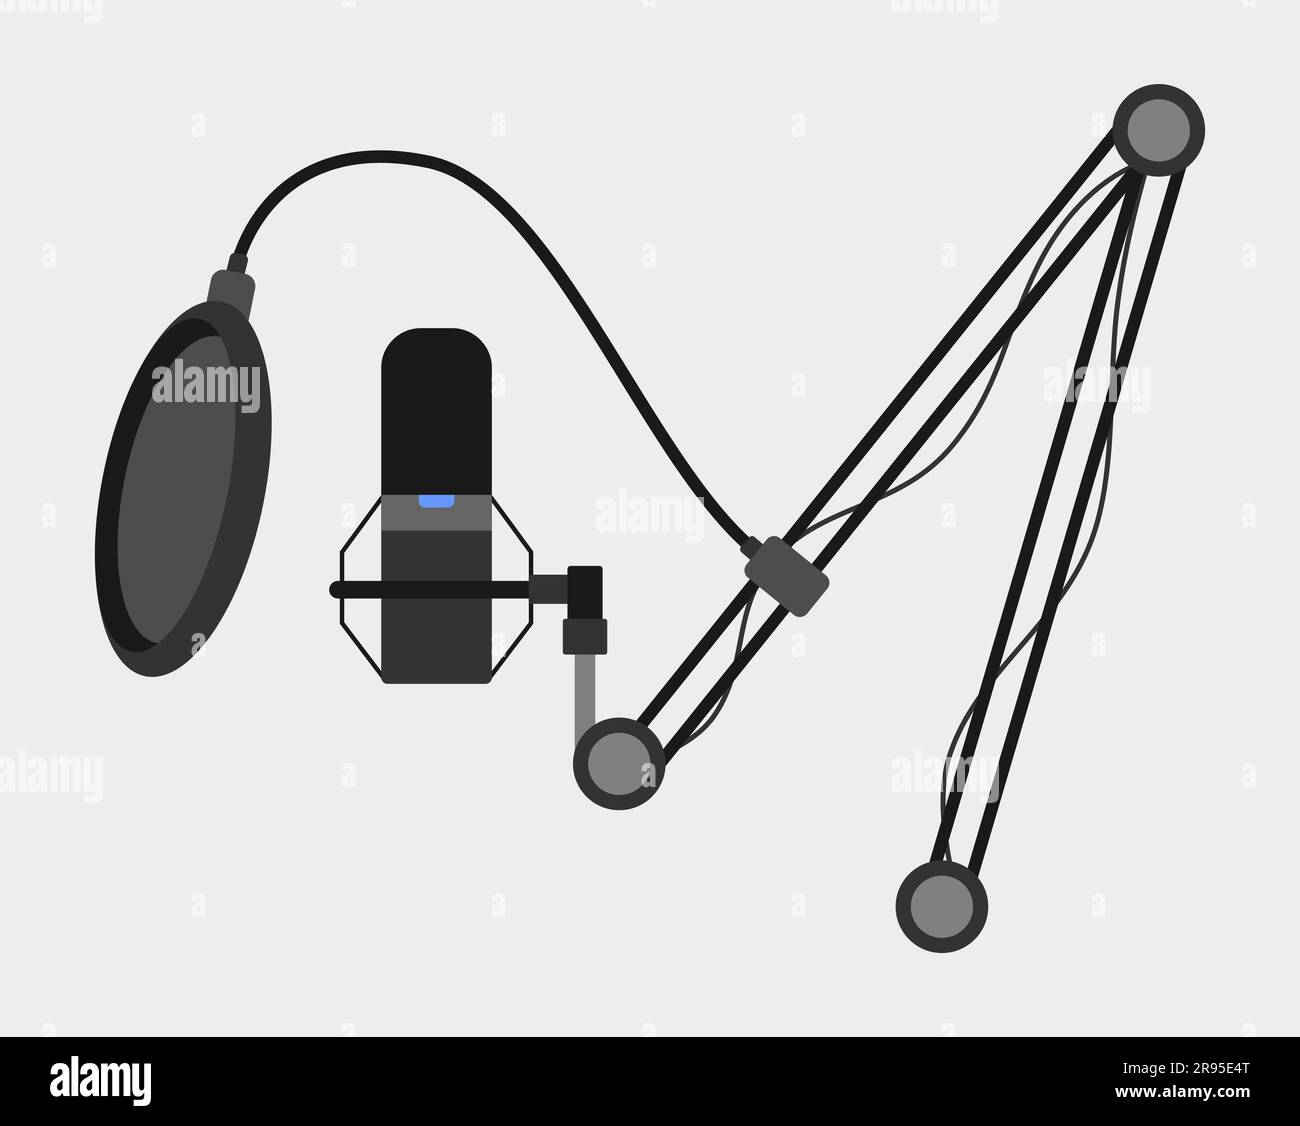 Streaming podcast studio microphone on gray background. Flat vector illustration Stock Vector